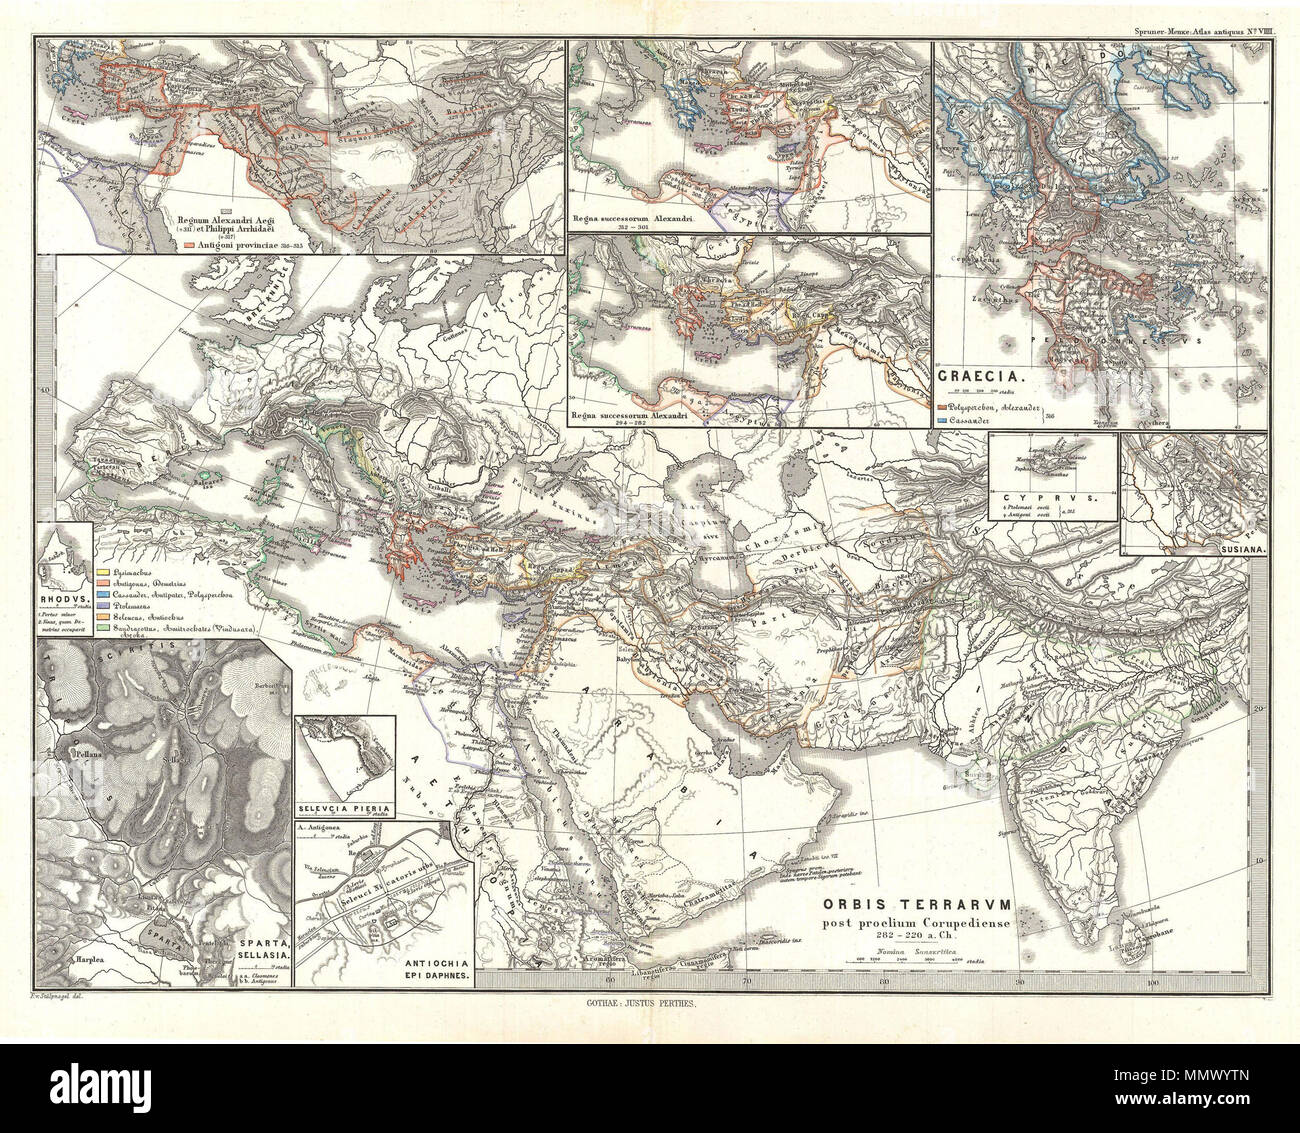 .  English: This is Karl von Spruner’s 1865 map, Orbis Terrarum post proelium Corupediense, or The World after the Battle of Corupedium. The Battle of Corupedium (also called Corupedion) is the name of the last battle of the Diadochi, the rival successors to Alexander the Great. It was fought, in 281 BC between the armies of Lysimachus and Seleucus I Nicator. This map depicts the known world at this time, from Spain in Europe at the western most point, to India in the far-east. Spruner also includes a number of detailed insets, including Greece, Cyrpus and Susiana, as well as depictions of kin Stock Photo